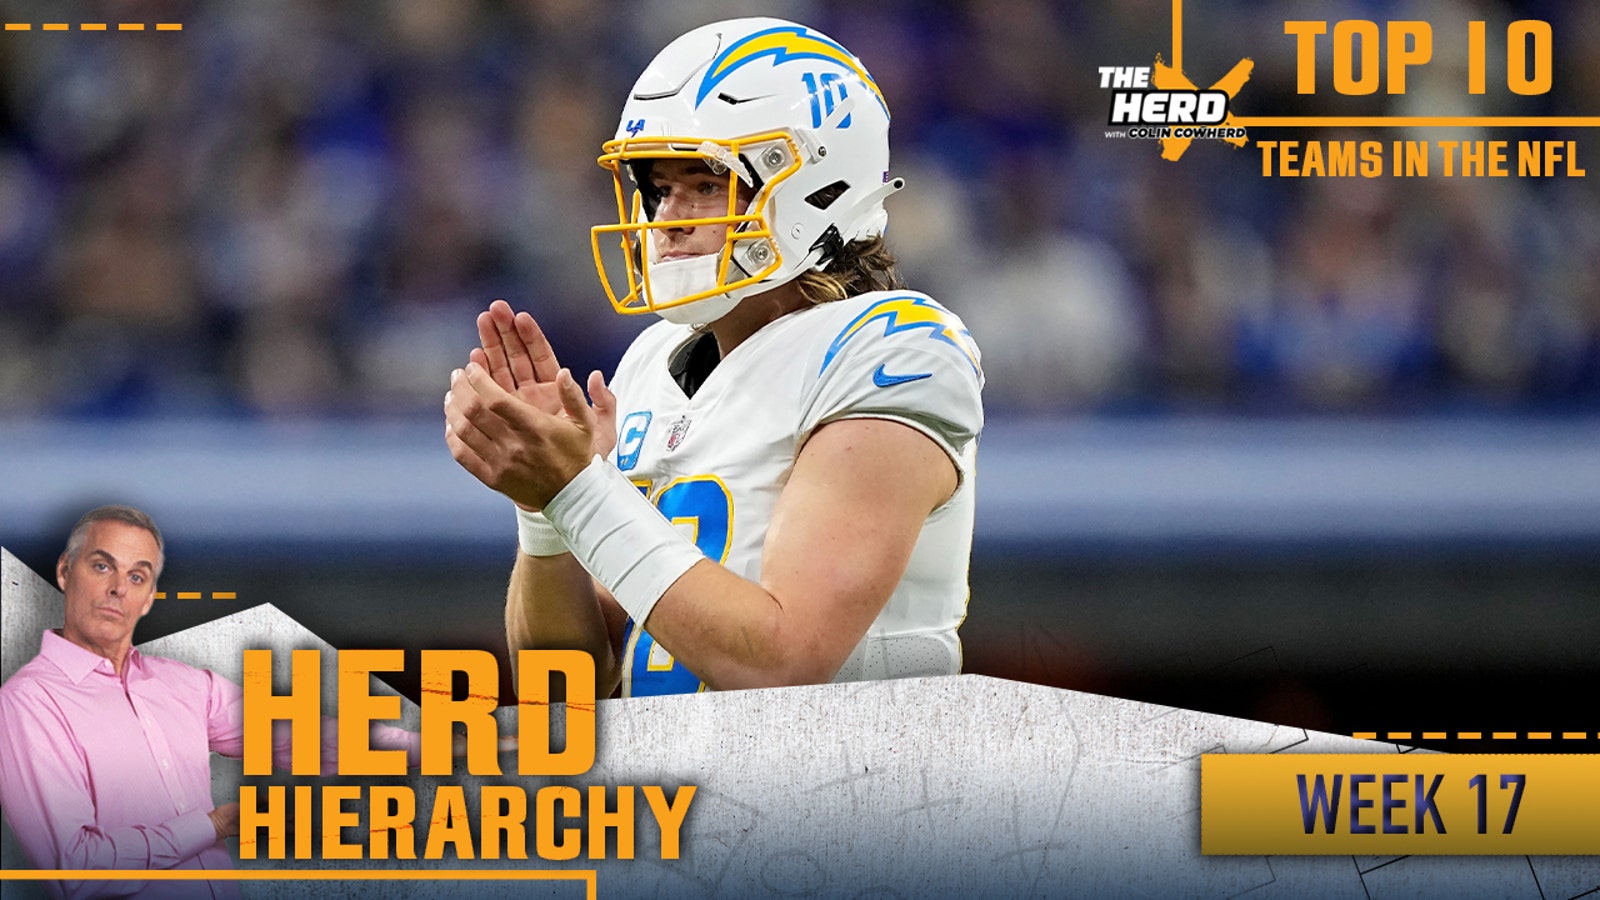 Herd Hierarchy: Chargers Heading to Playoffs, Packers Climb Collin's Top 10 for Week 17